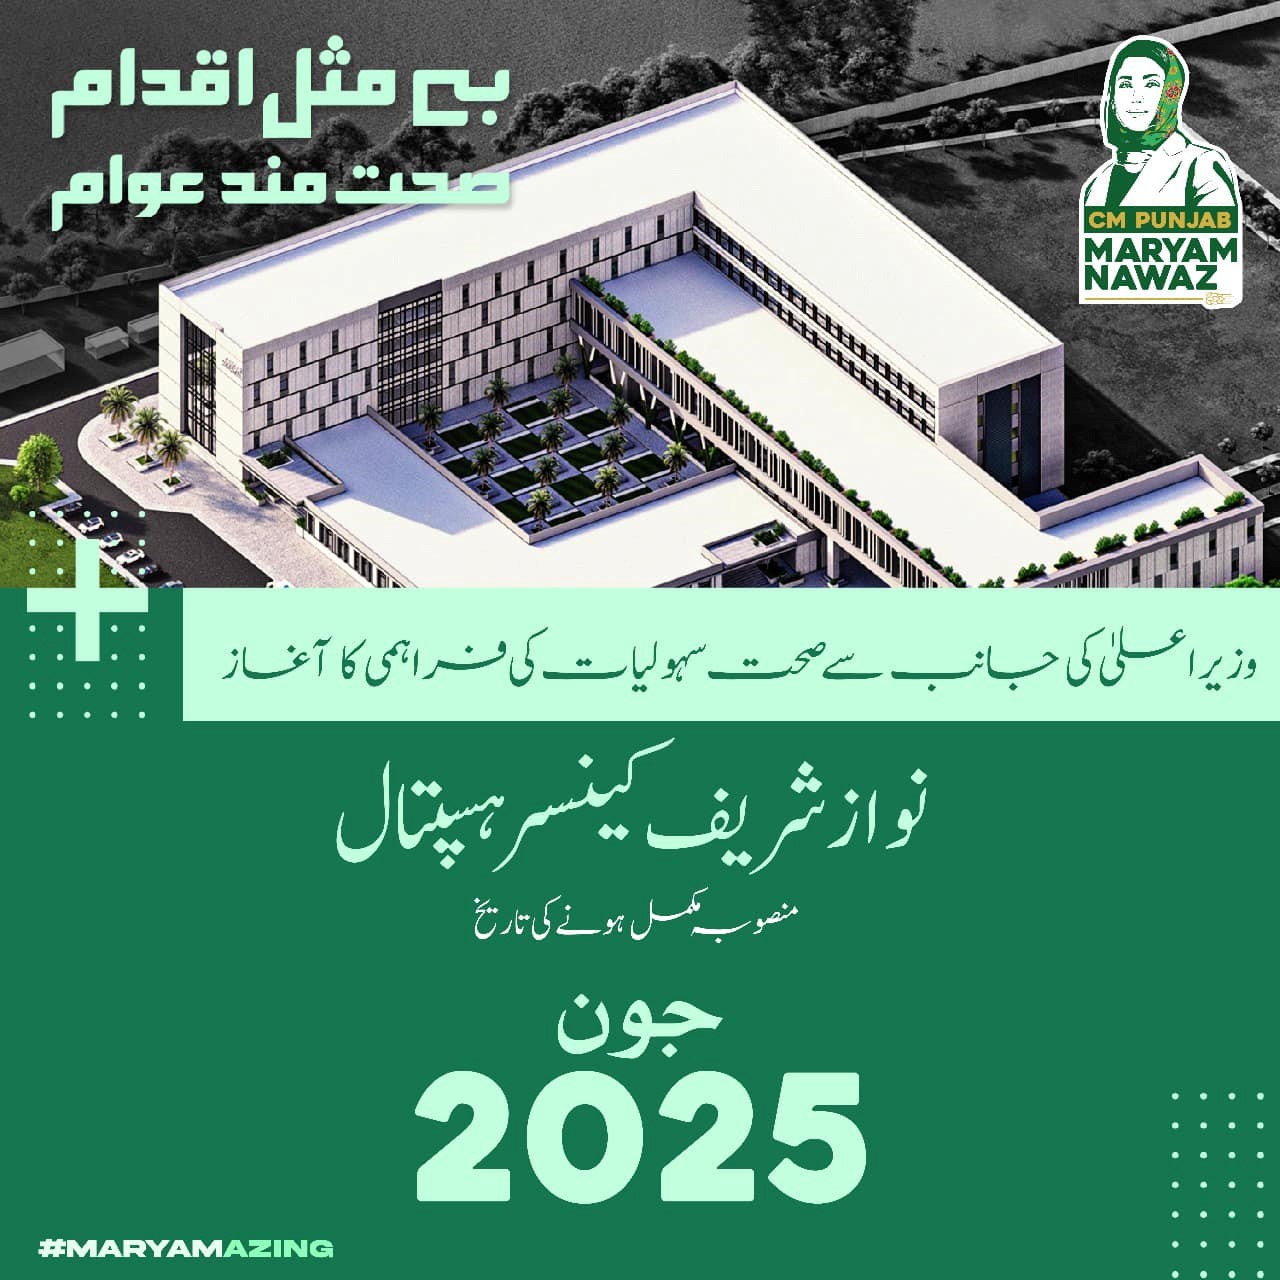 Construction of Cancer Hospital in Lahore